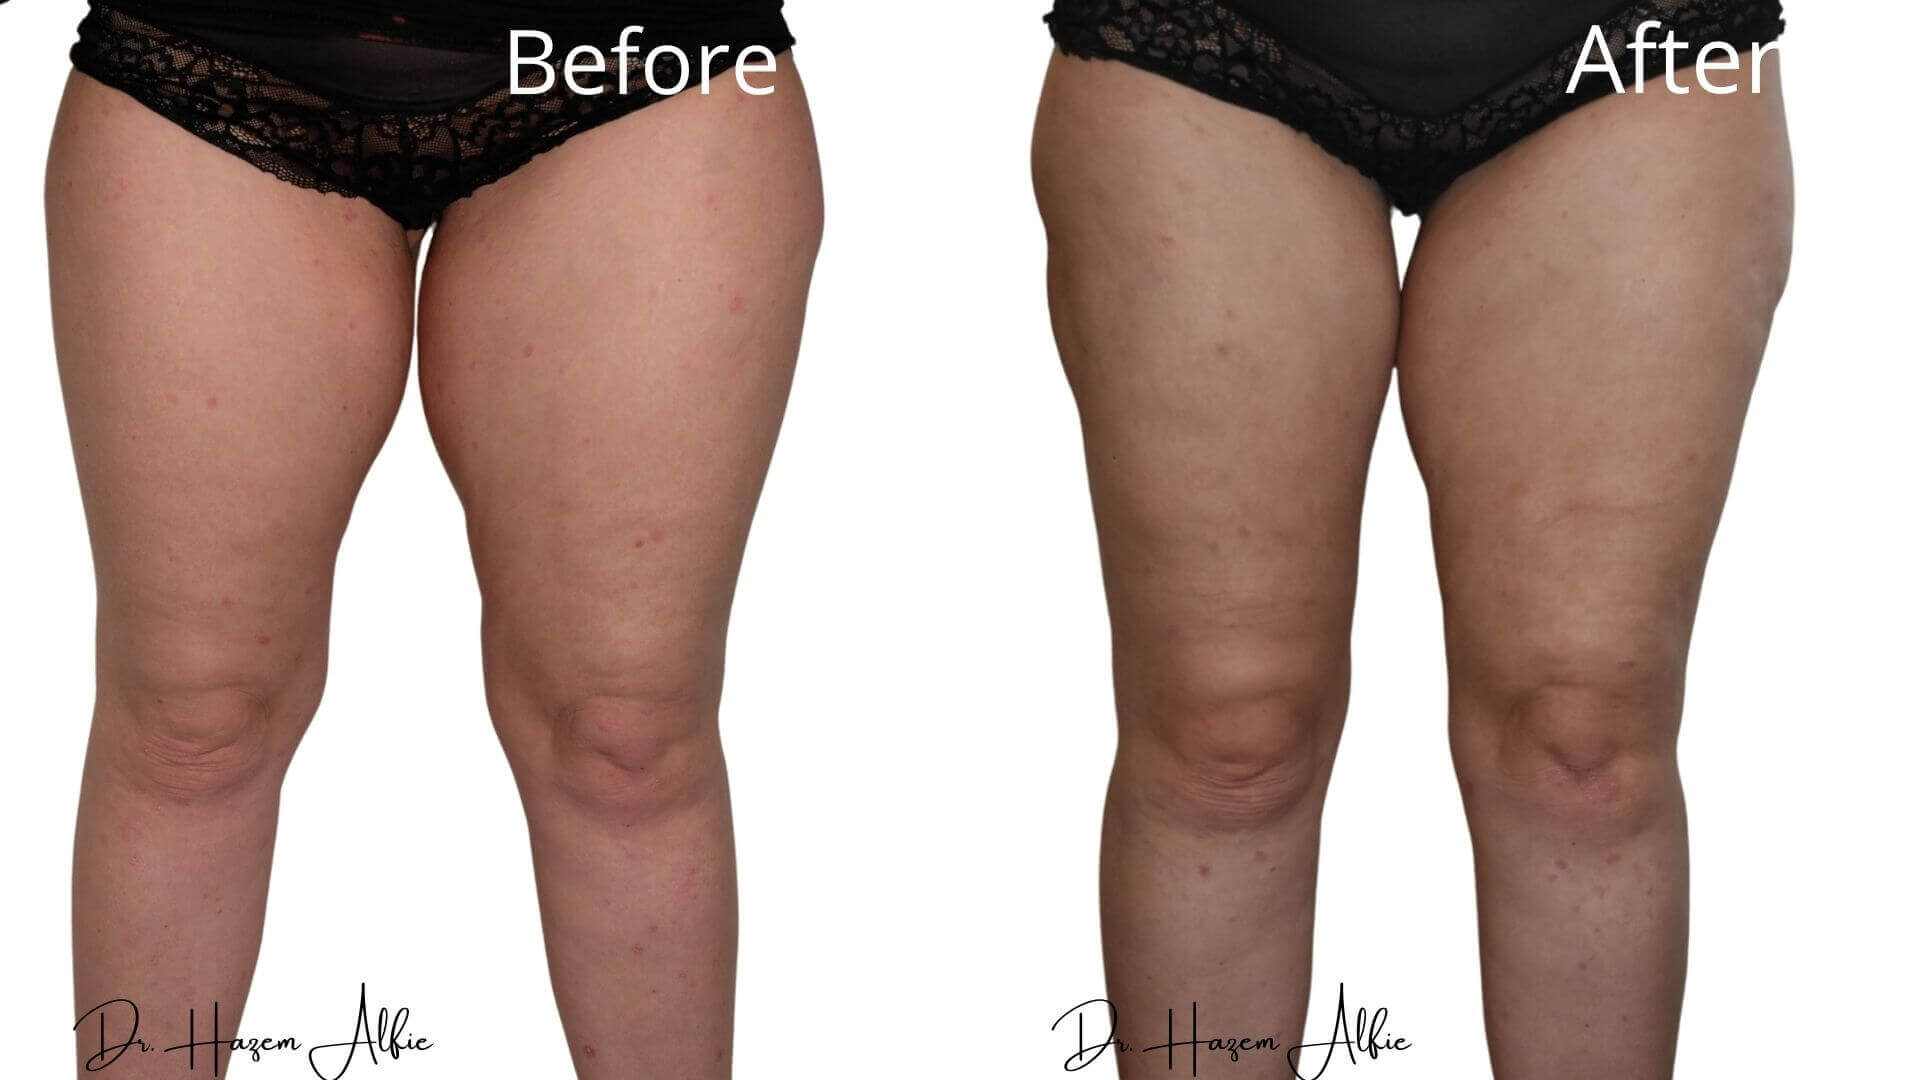 A before and after picture of the legs of two women.